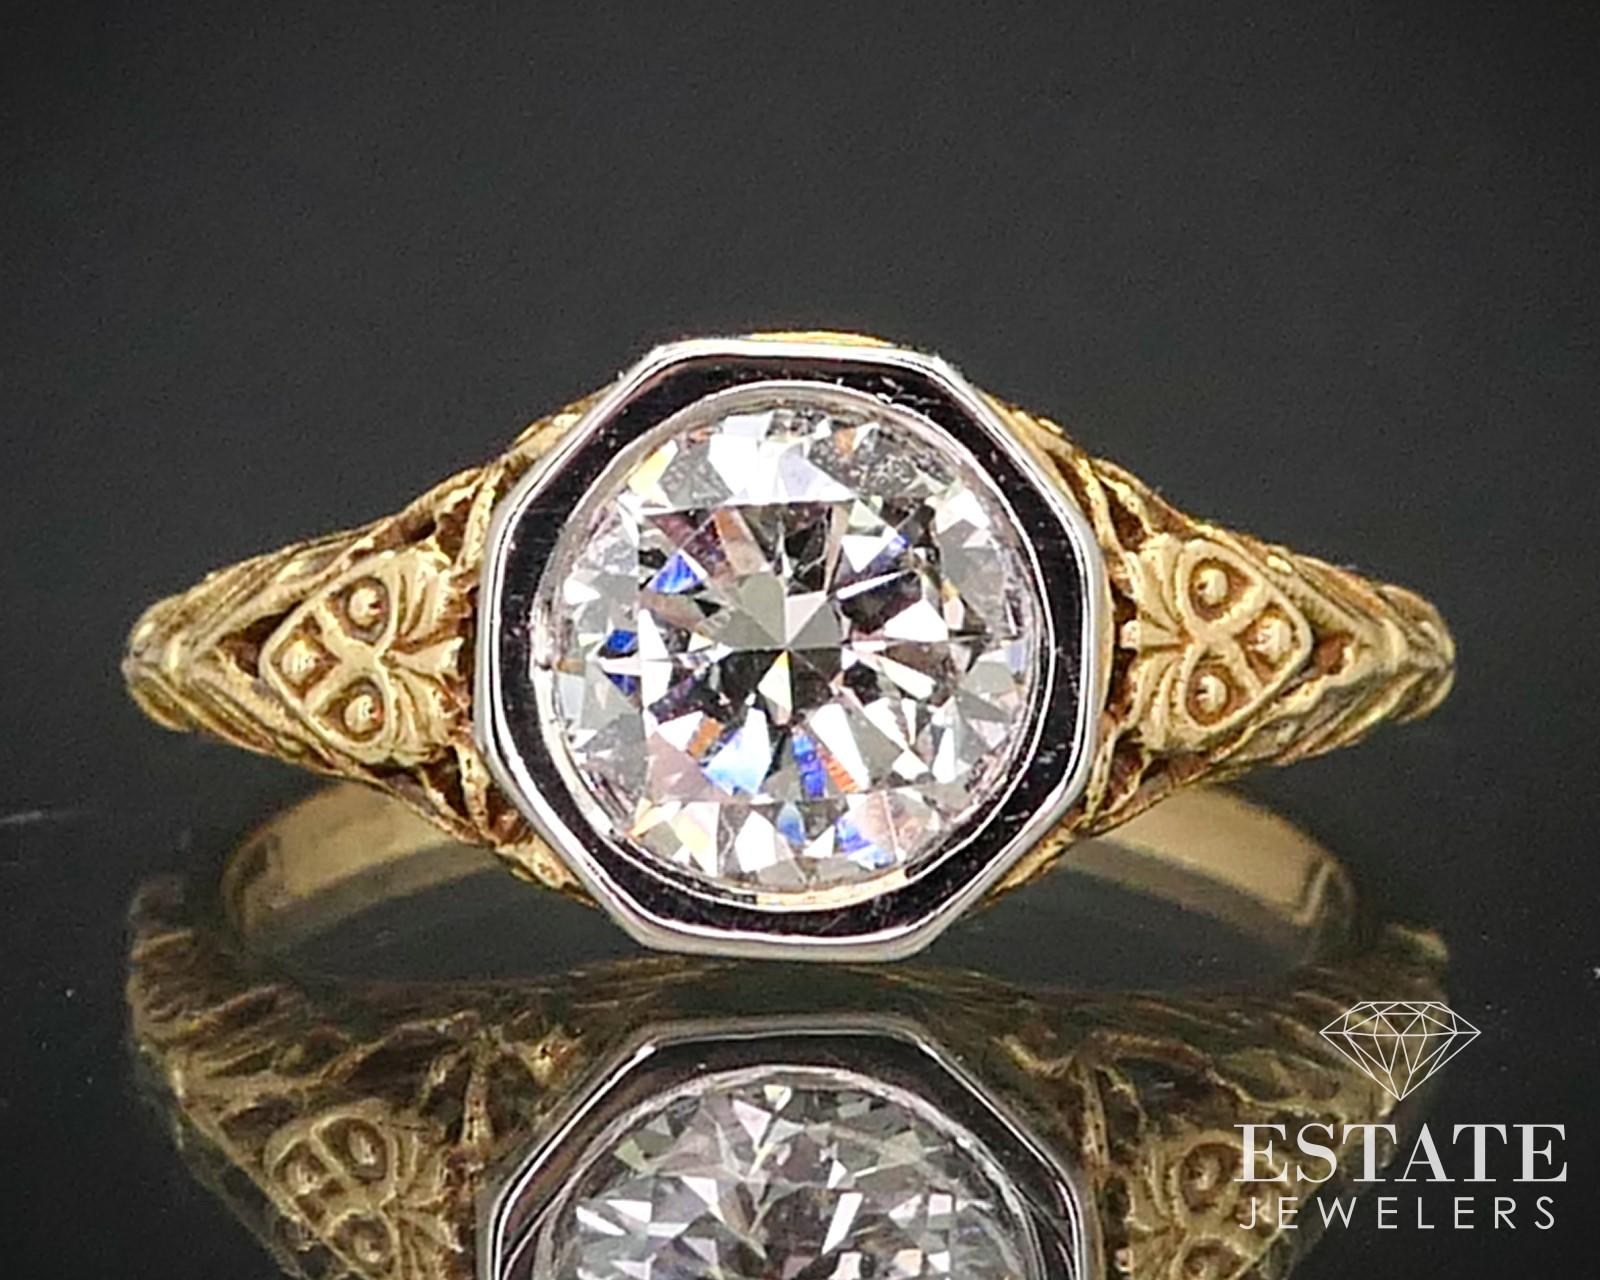 This stunning ring is a designer piece by Jabel, an American fine jewelry designer specializing in antique-style jewelry. This die struck ring is cast in 18K yellow gold with beautiful filigree design work, with an 18K white gold head - A design